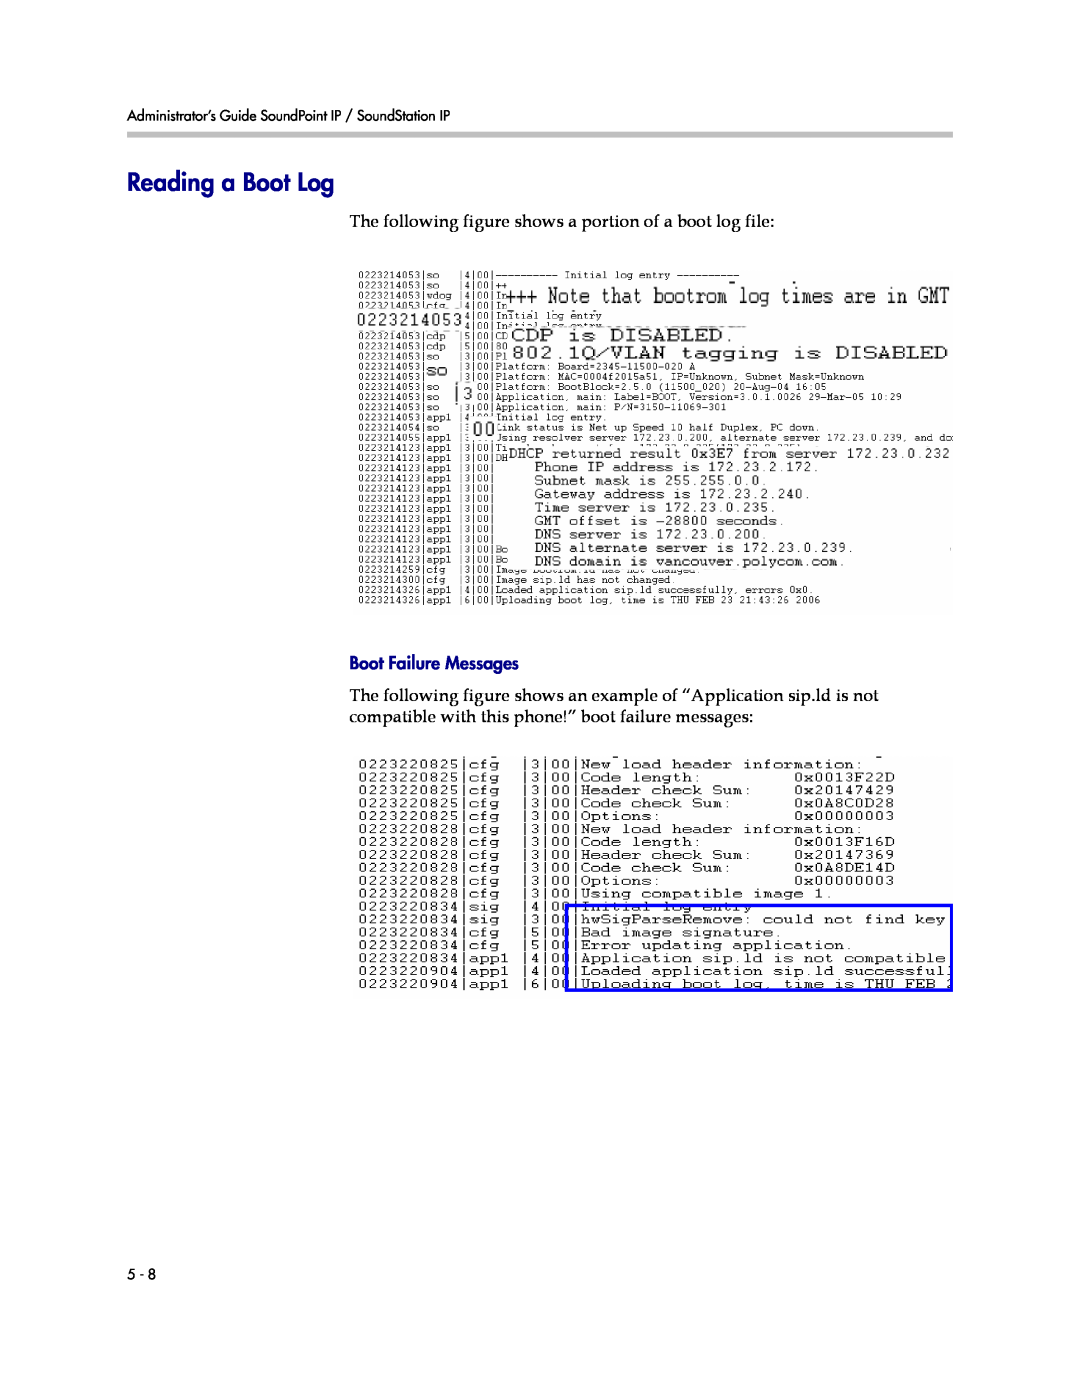 Polycom SIP 3.1 manual Reading a Boot Log, Boot Failure Messages, The following figure shows a portion of a boot log file 